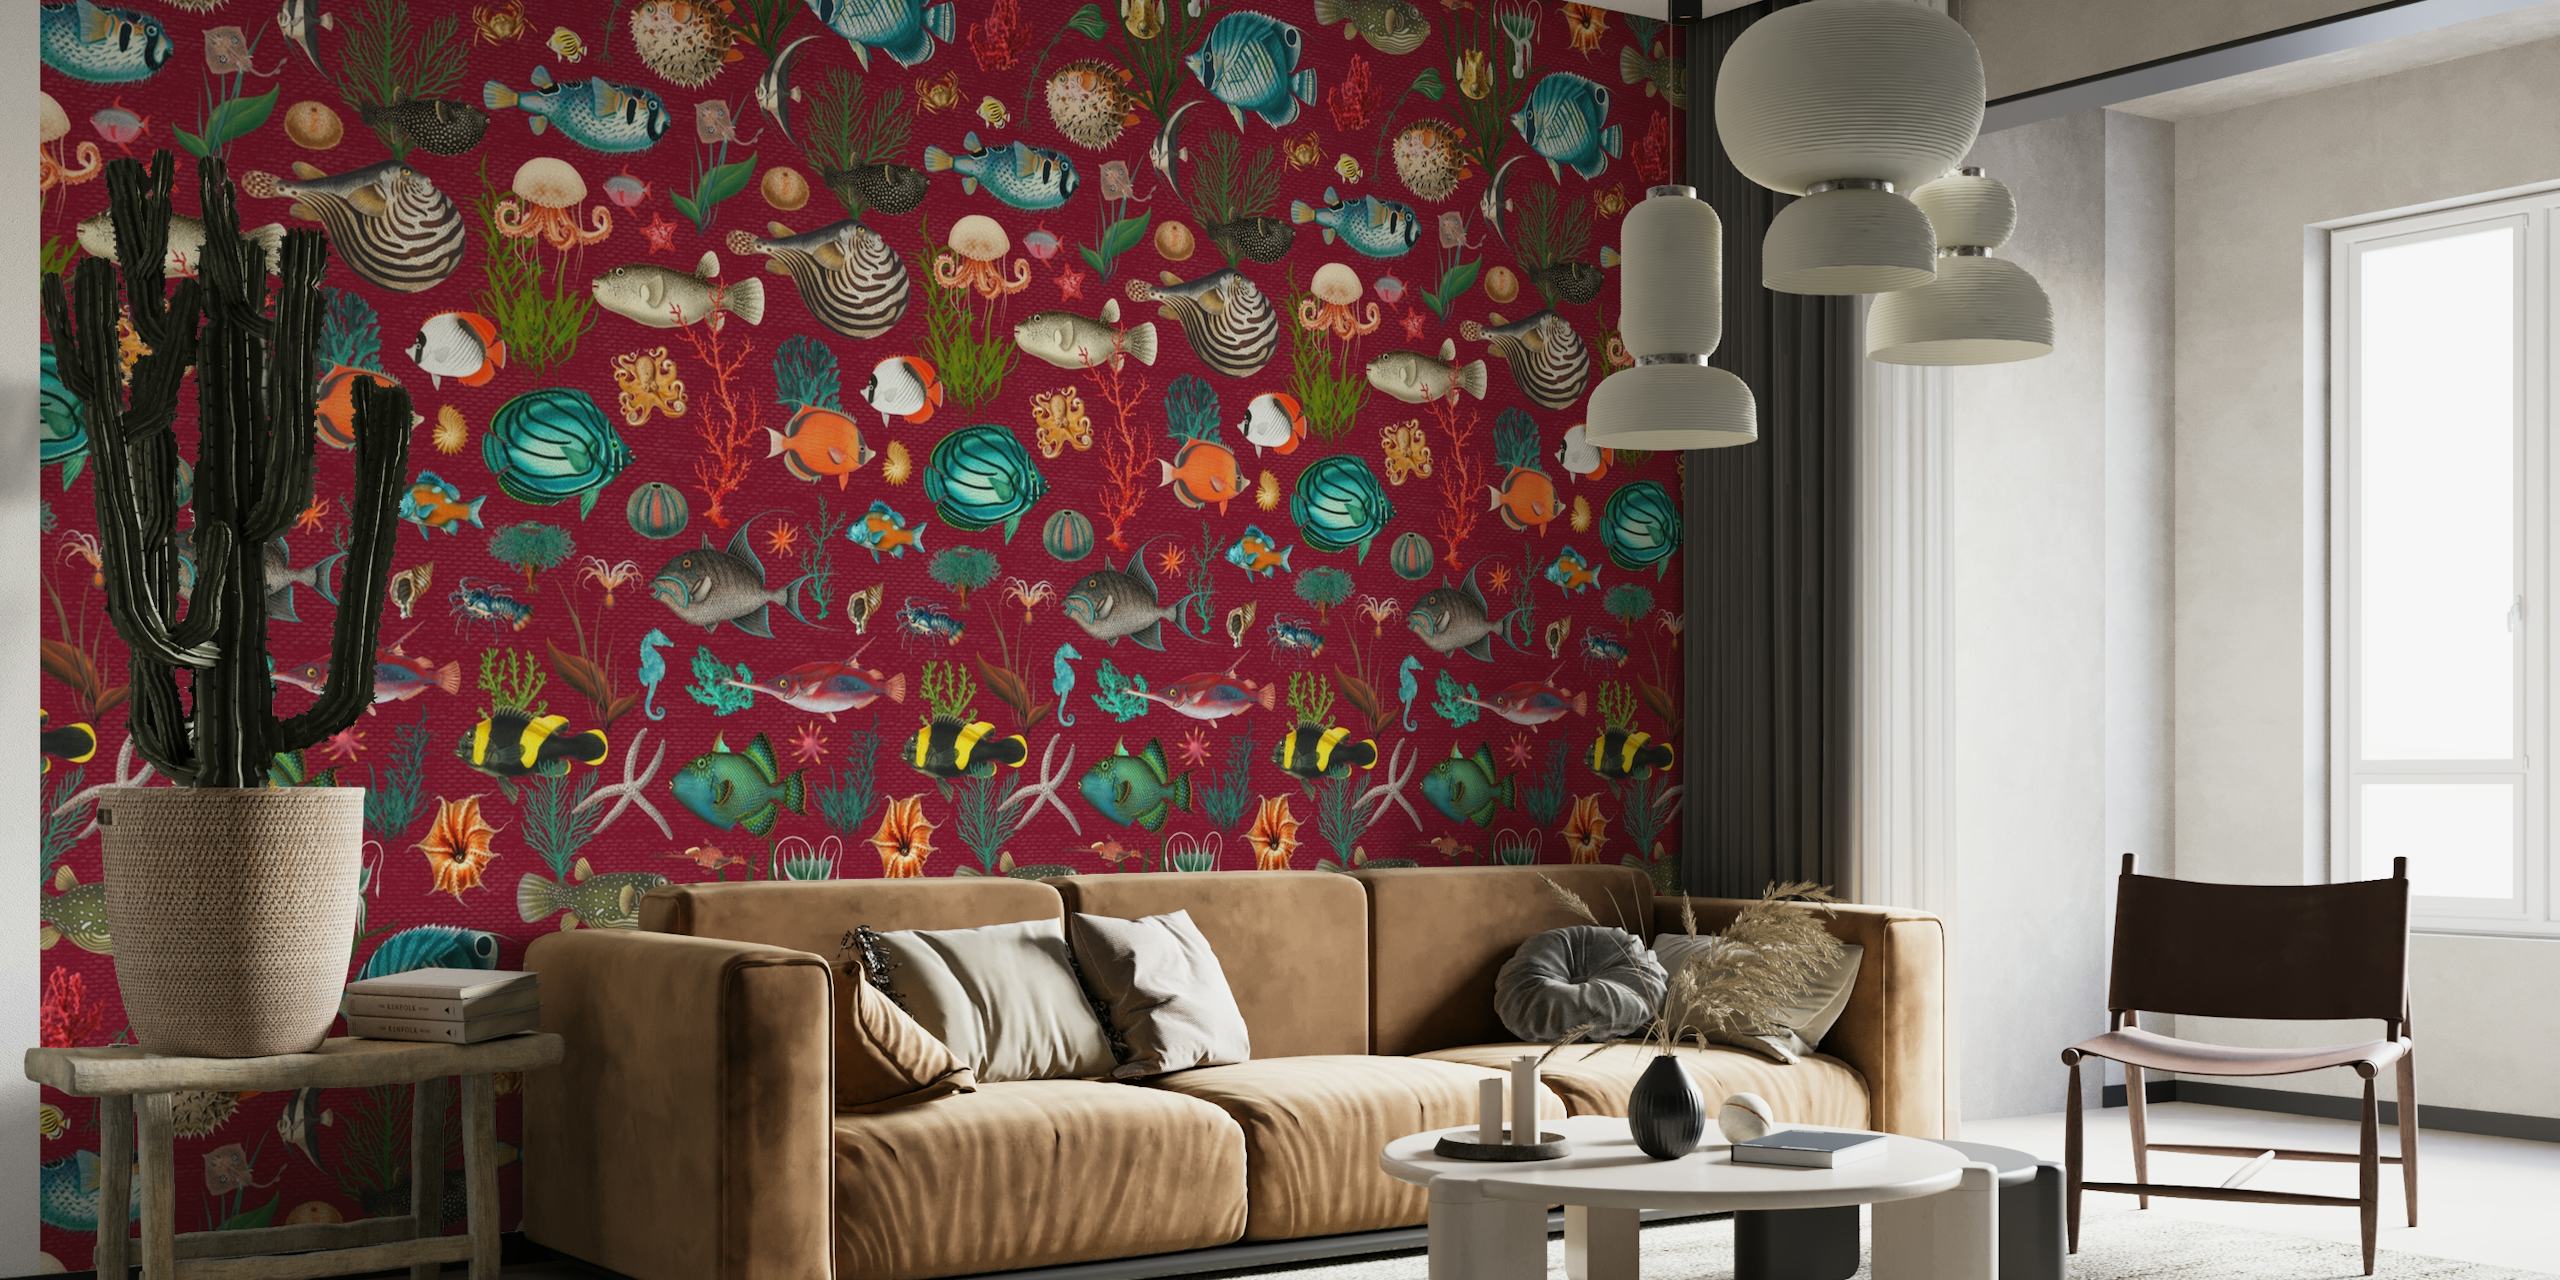 Oceania in Burgundy Red wall mural with floral and marine patterns